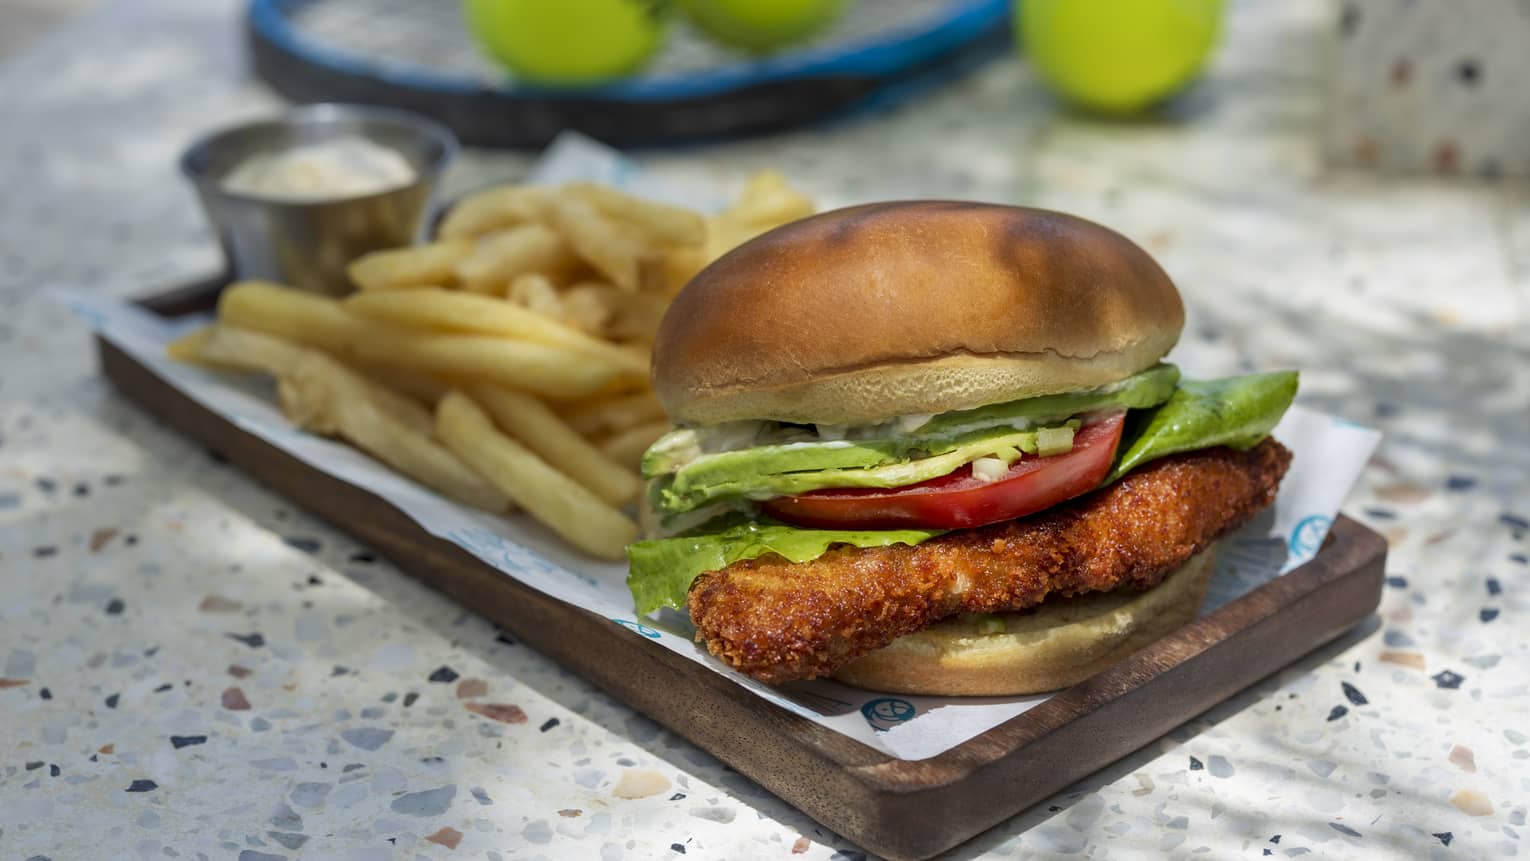 Crispy chicken sandwich with tomato, lettuce, avocado on a bun served with a side of ranch dressing and fries on a rectangular wooden plate